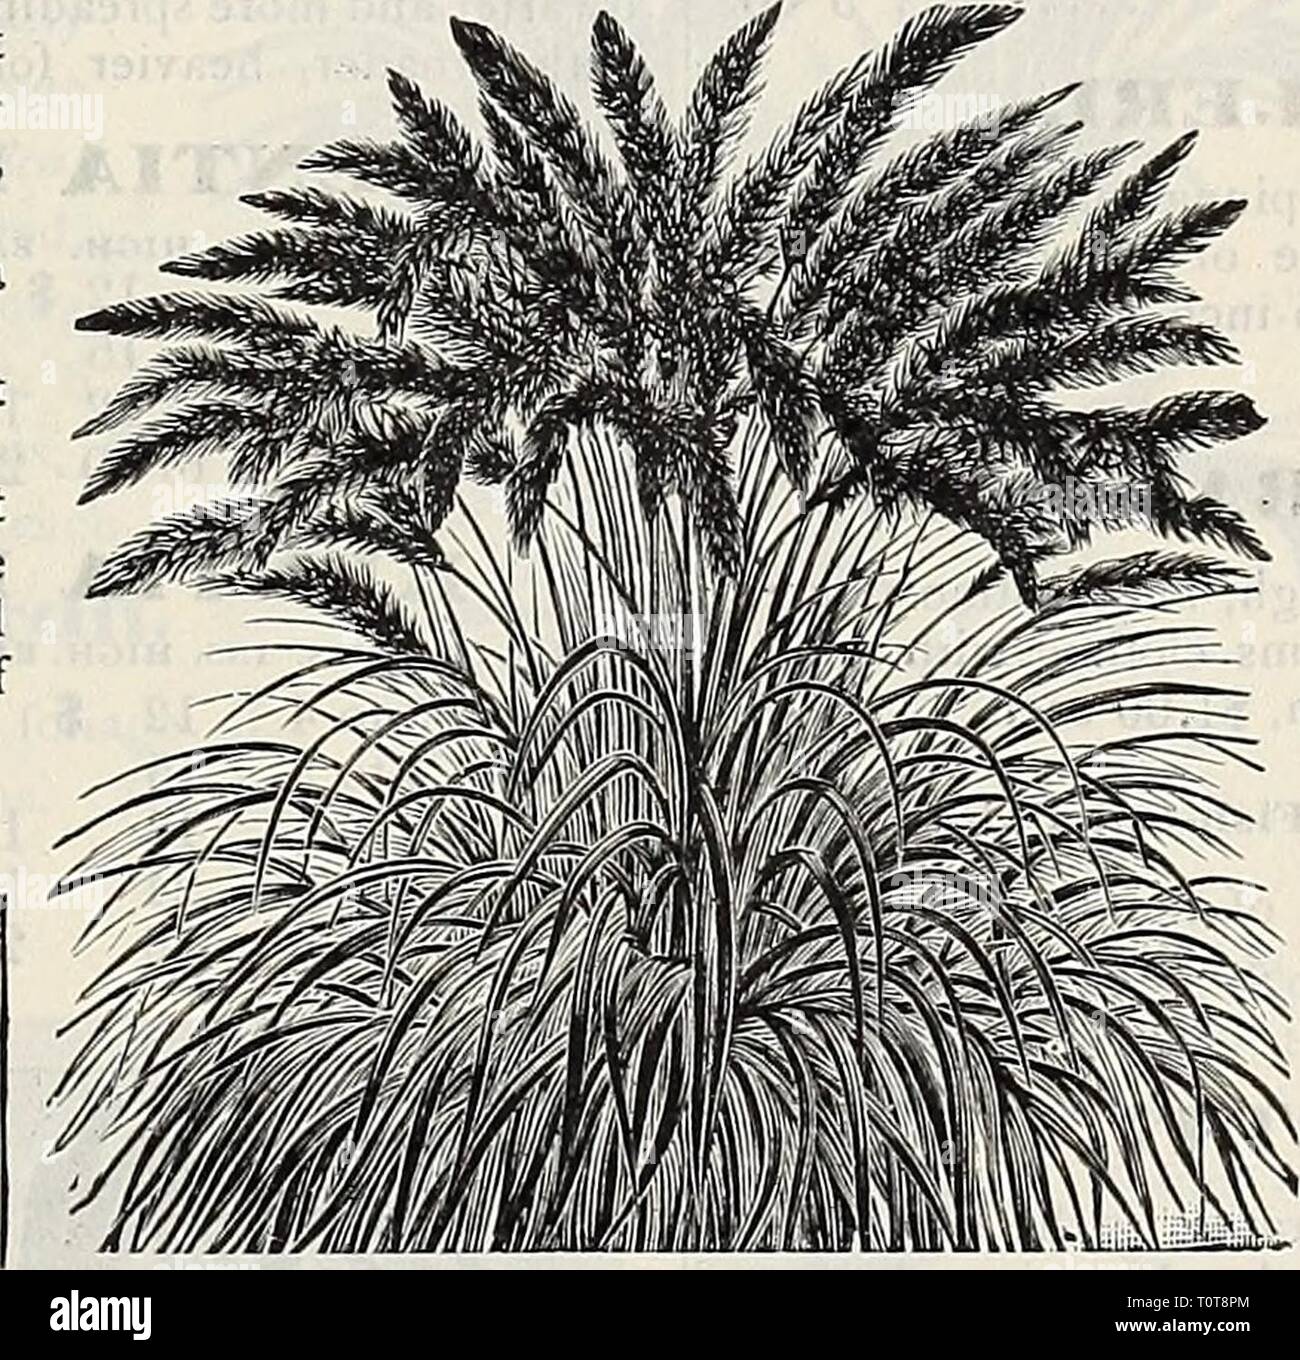 Dreer's garden book  1906 Dreer's garden book : 1906  dreersgardenbook1906henr Year: 1906  New and Kare Plants. We have a splendid lot of new things this season. See pages 103 to 112.    PennisbtumRubpphlianum. Pandanus Veitchi. ROYAI. EXHIBI- TION PANSIES. The plants here offered are grown from our own choicest strain of seed procured from the world's greatest Pansy specialist, and for size of bloom, richness of coloring and texture will be found unapproached by any other strain. (See cut.) Good strong plants, 50 cts. per doz.; $4.00 per 100. TUFTED PANSIES OR VIOI.AS. These appear to be much Stock Photo